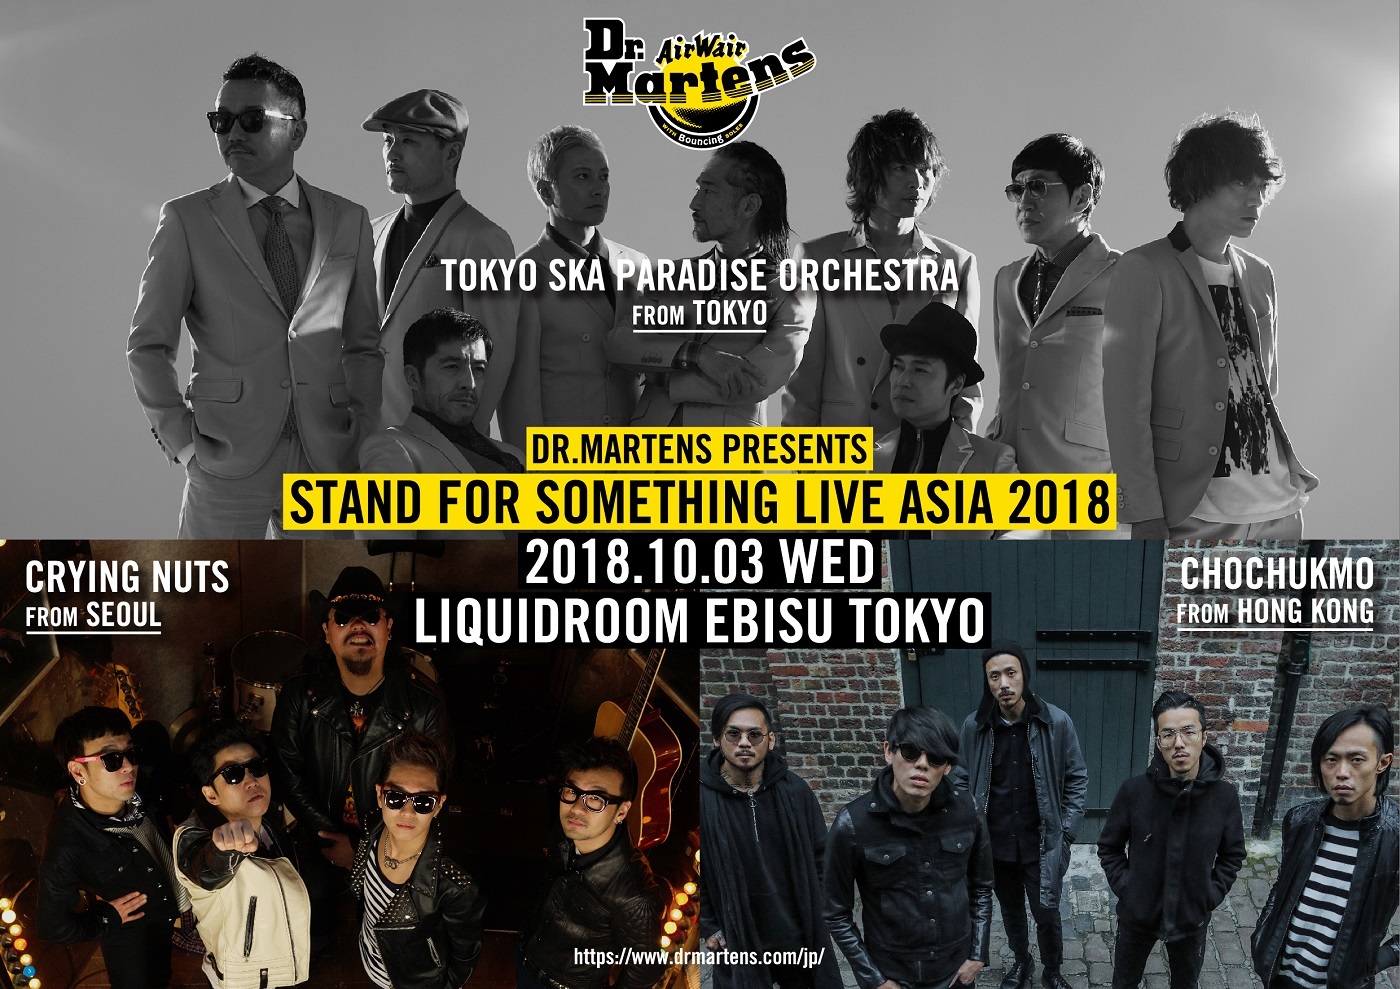 DR.MARTENS PRESENTS STAND FOR SOMETHING LIVE ASIA 2018